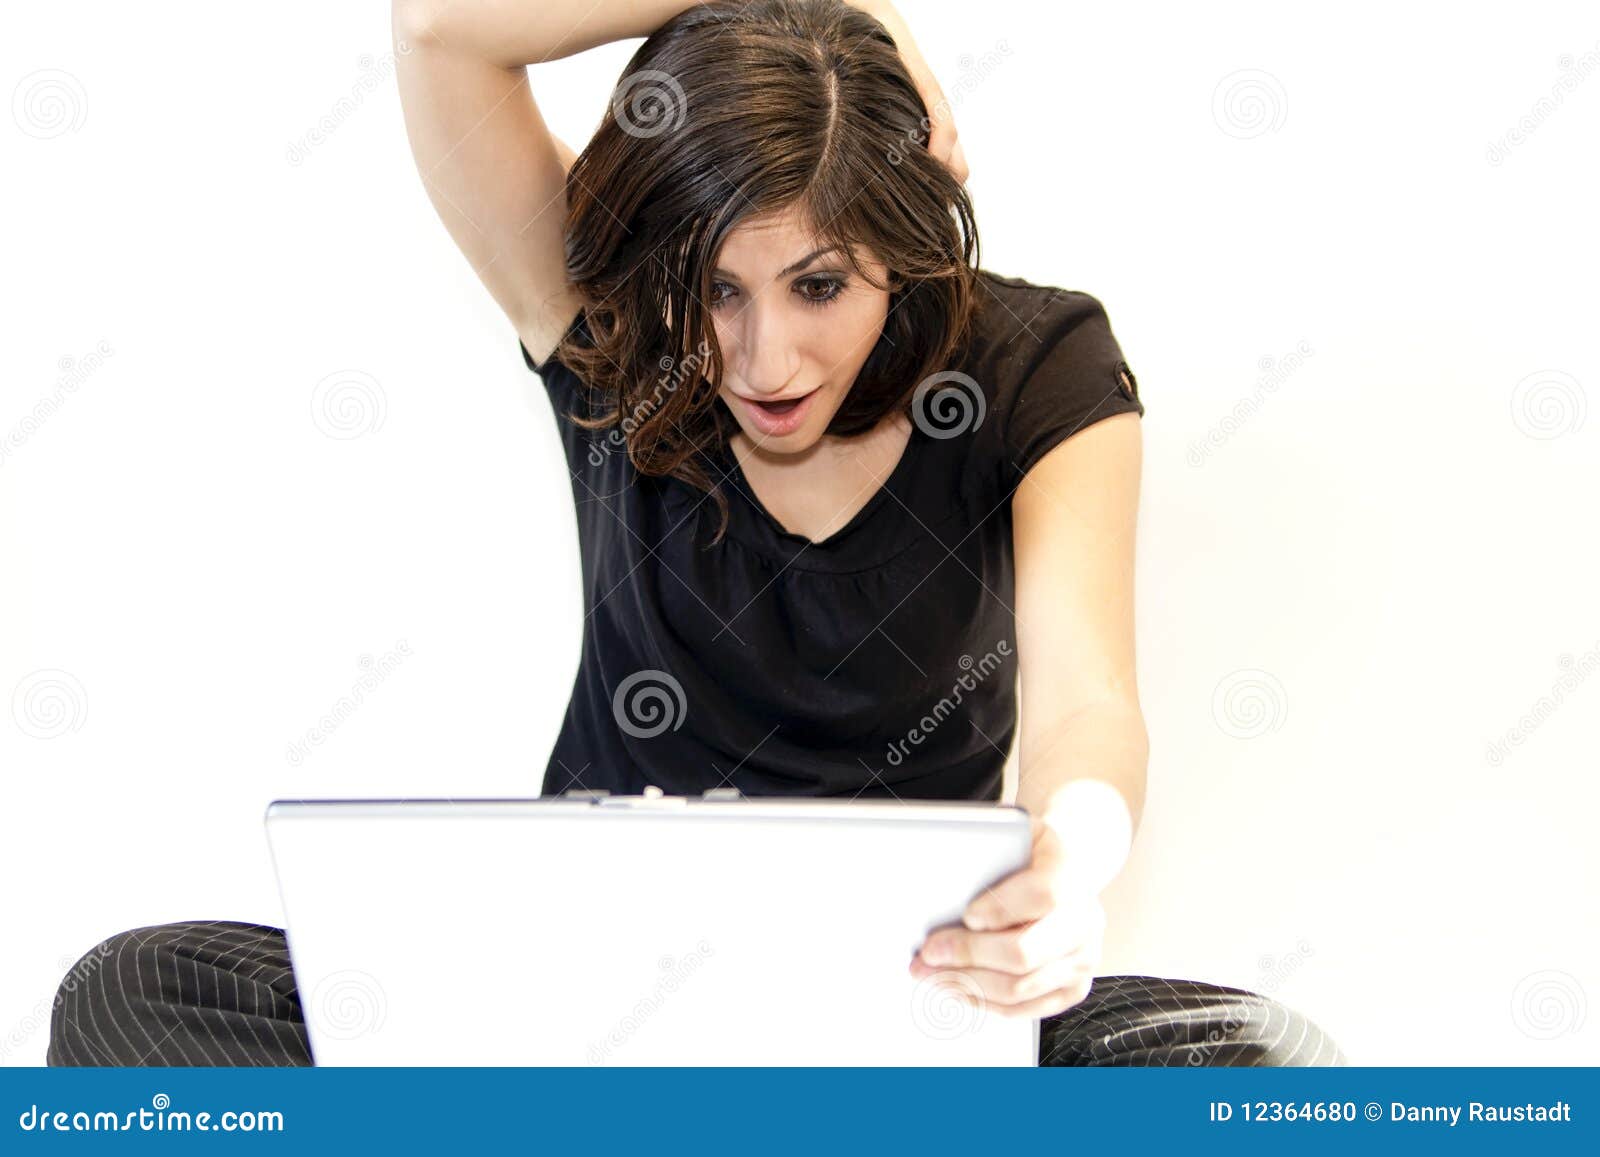 young brunette woman finds surprise on computer